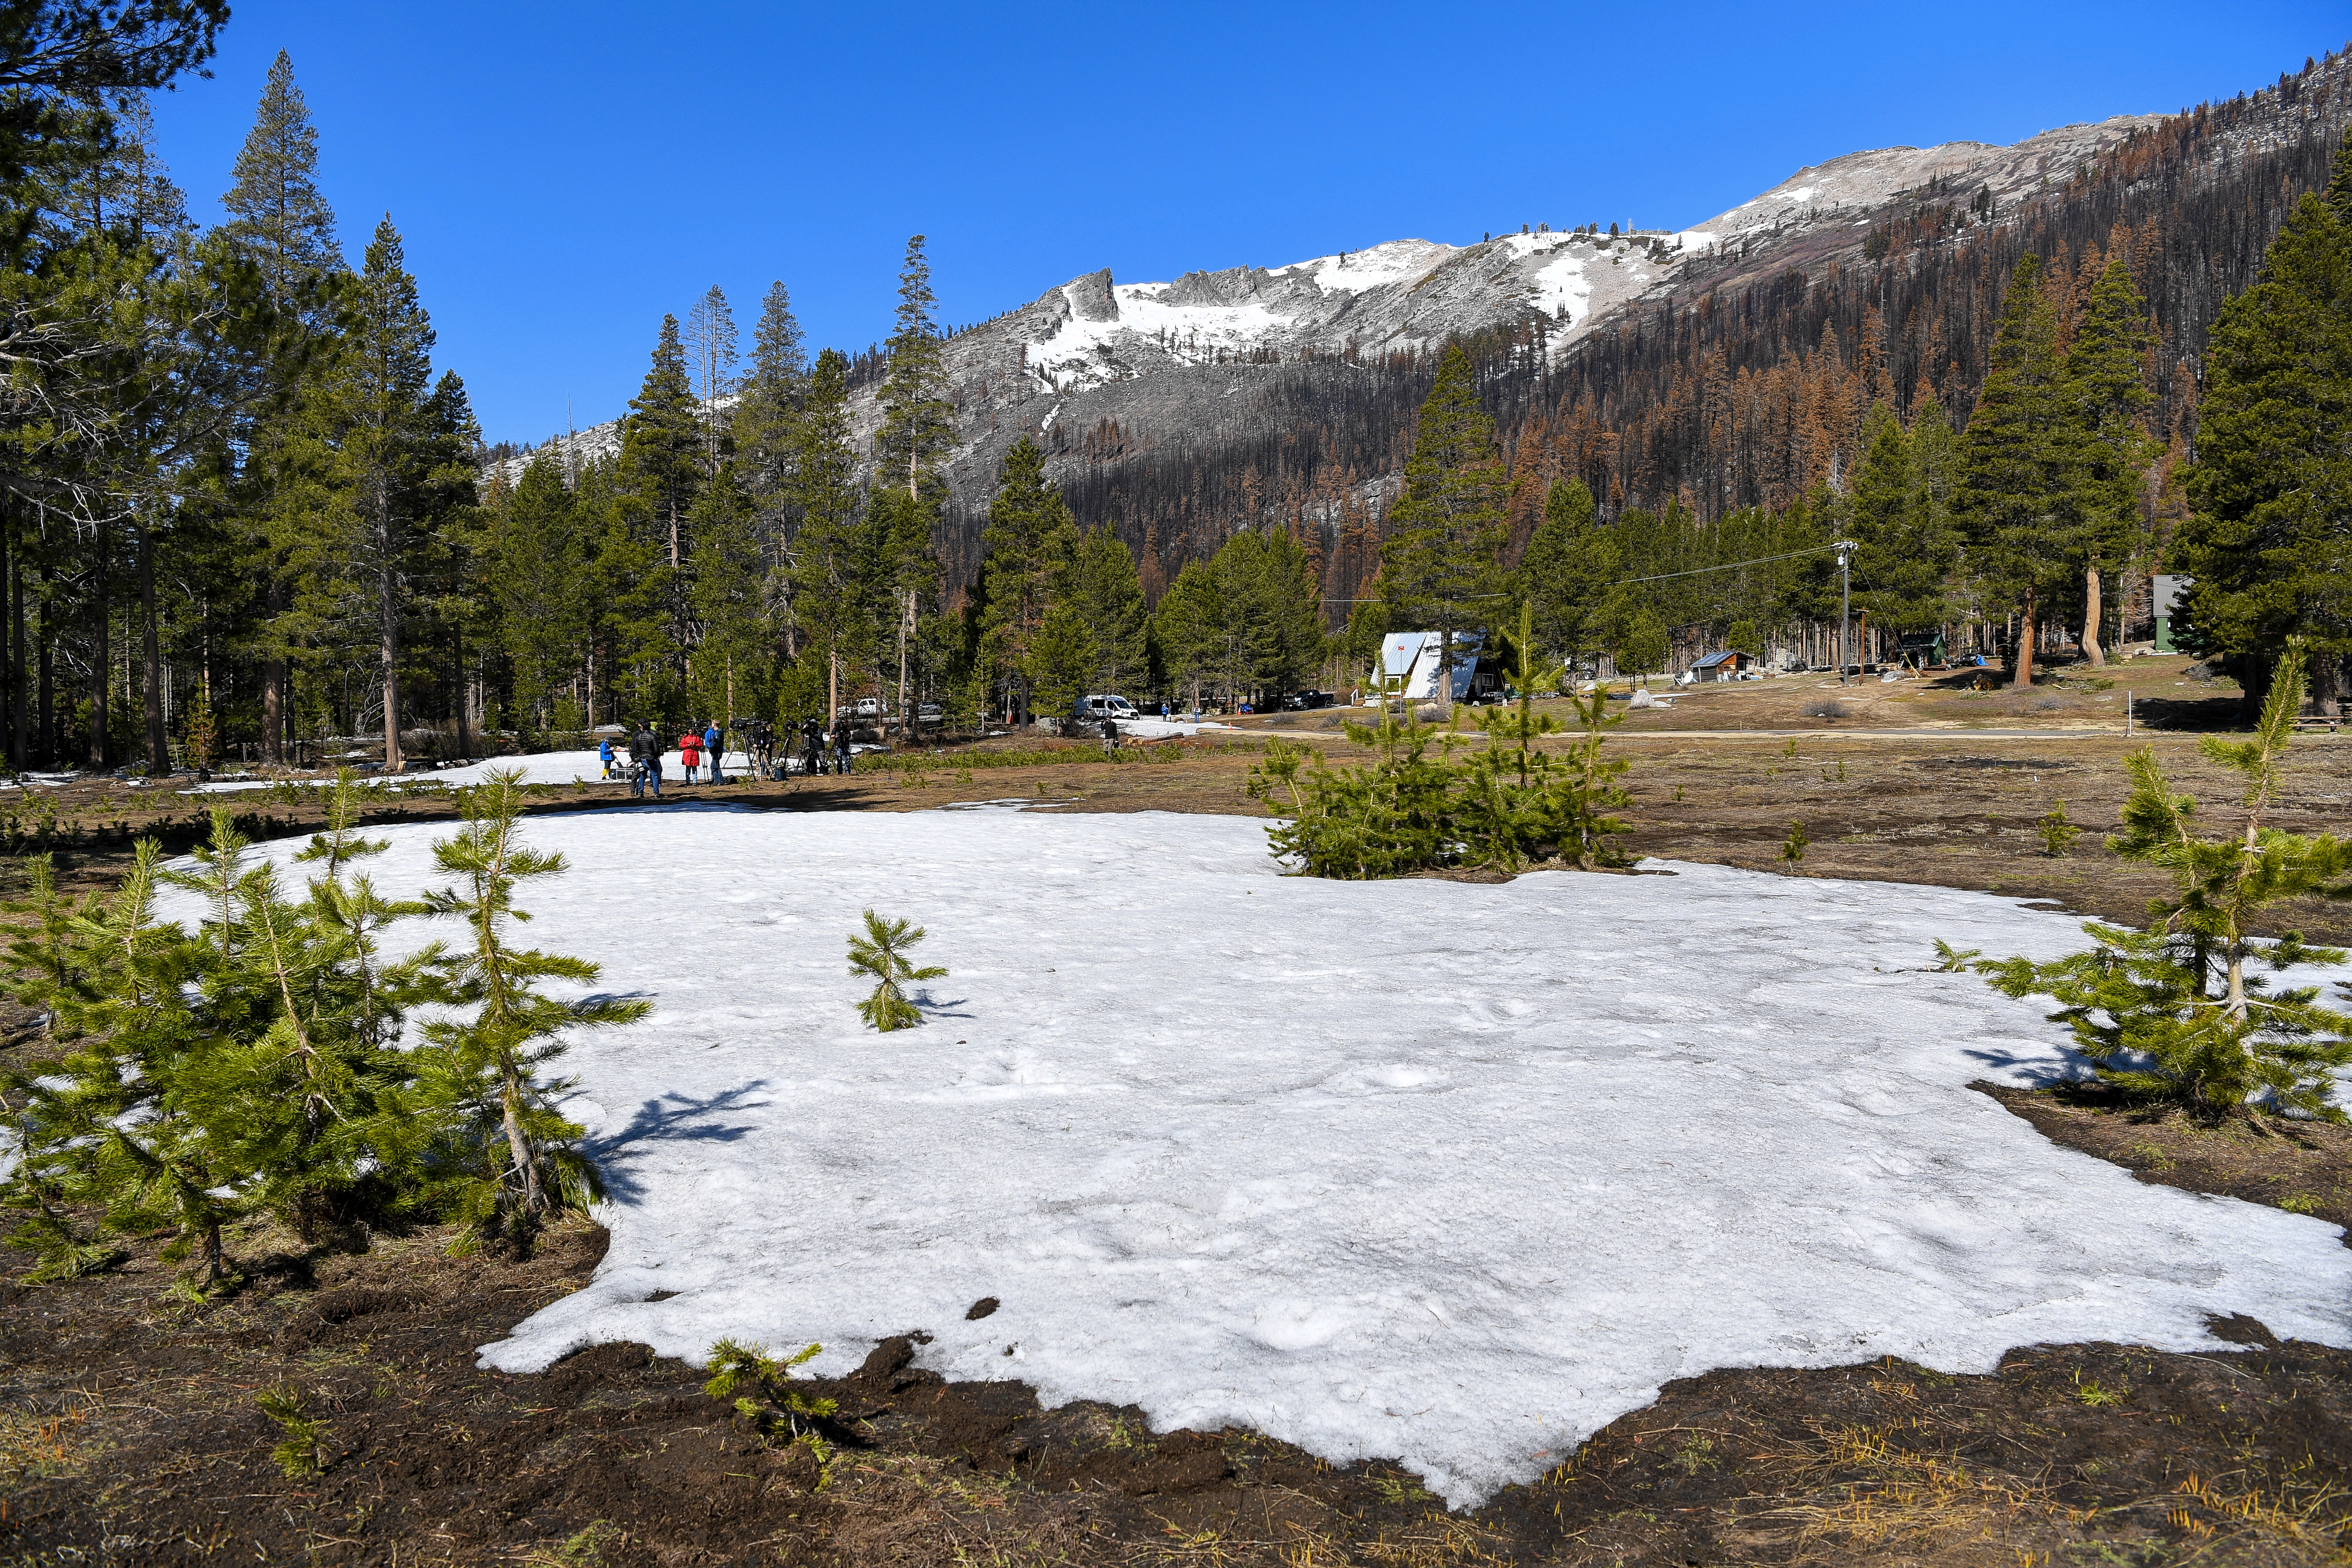 Very little snow remains on the ground for the California Department of Water Resources' fourth snow survey of the 2022 season at Phillips Station in the Sierra Nevada Mountains. The survey is held approximately 90 miles east of Sacramento off Highway 50